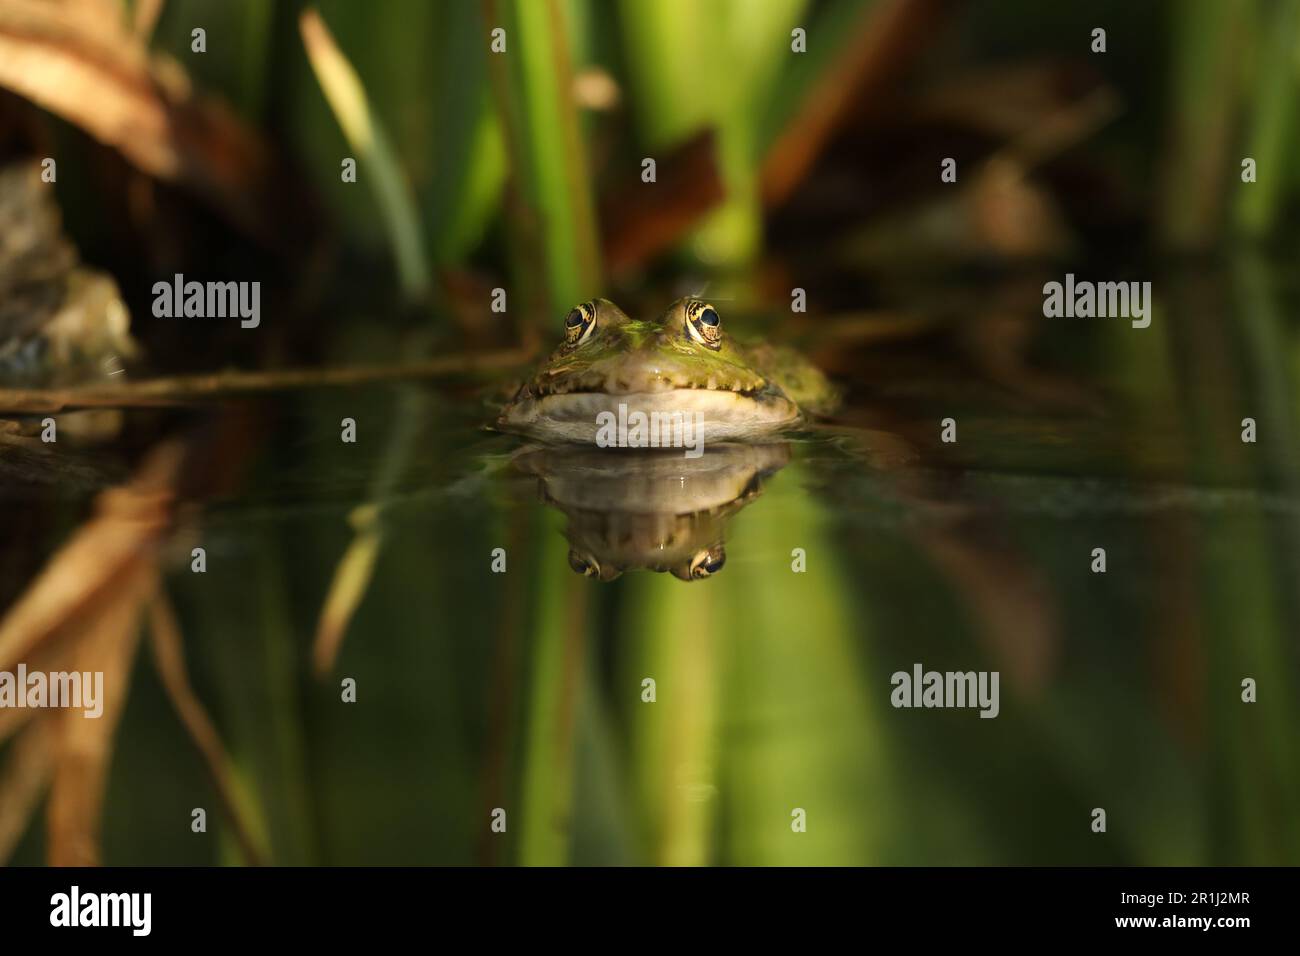 Green edible frog in the water with grass Stock Photo